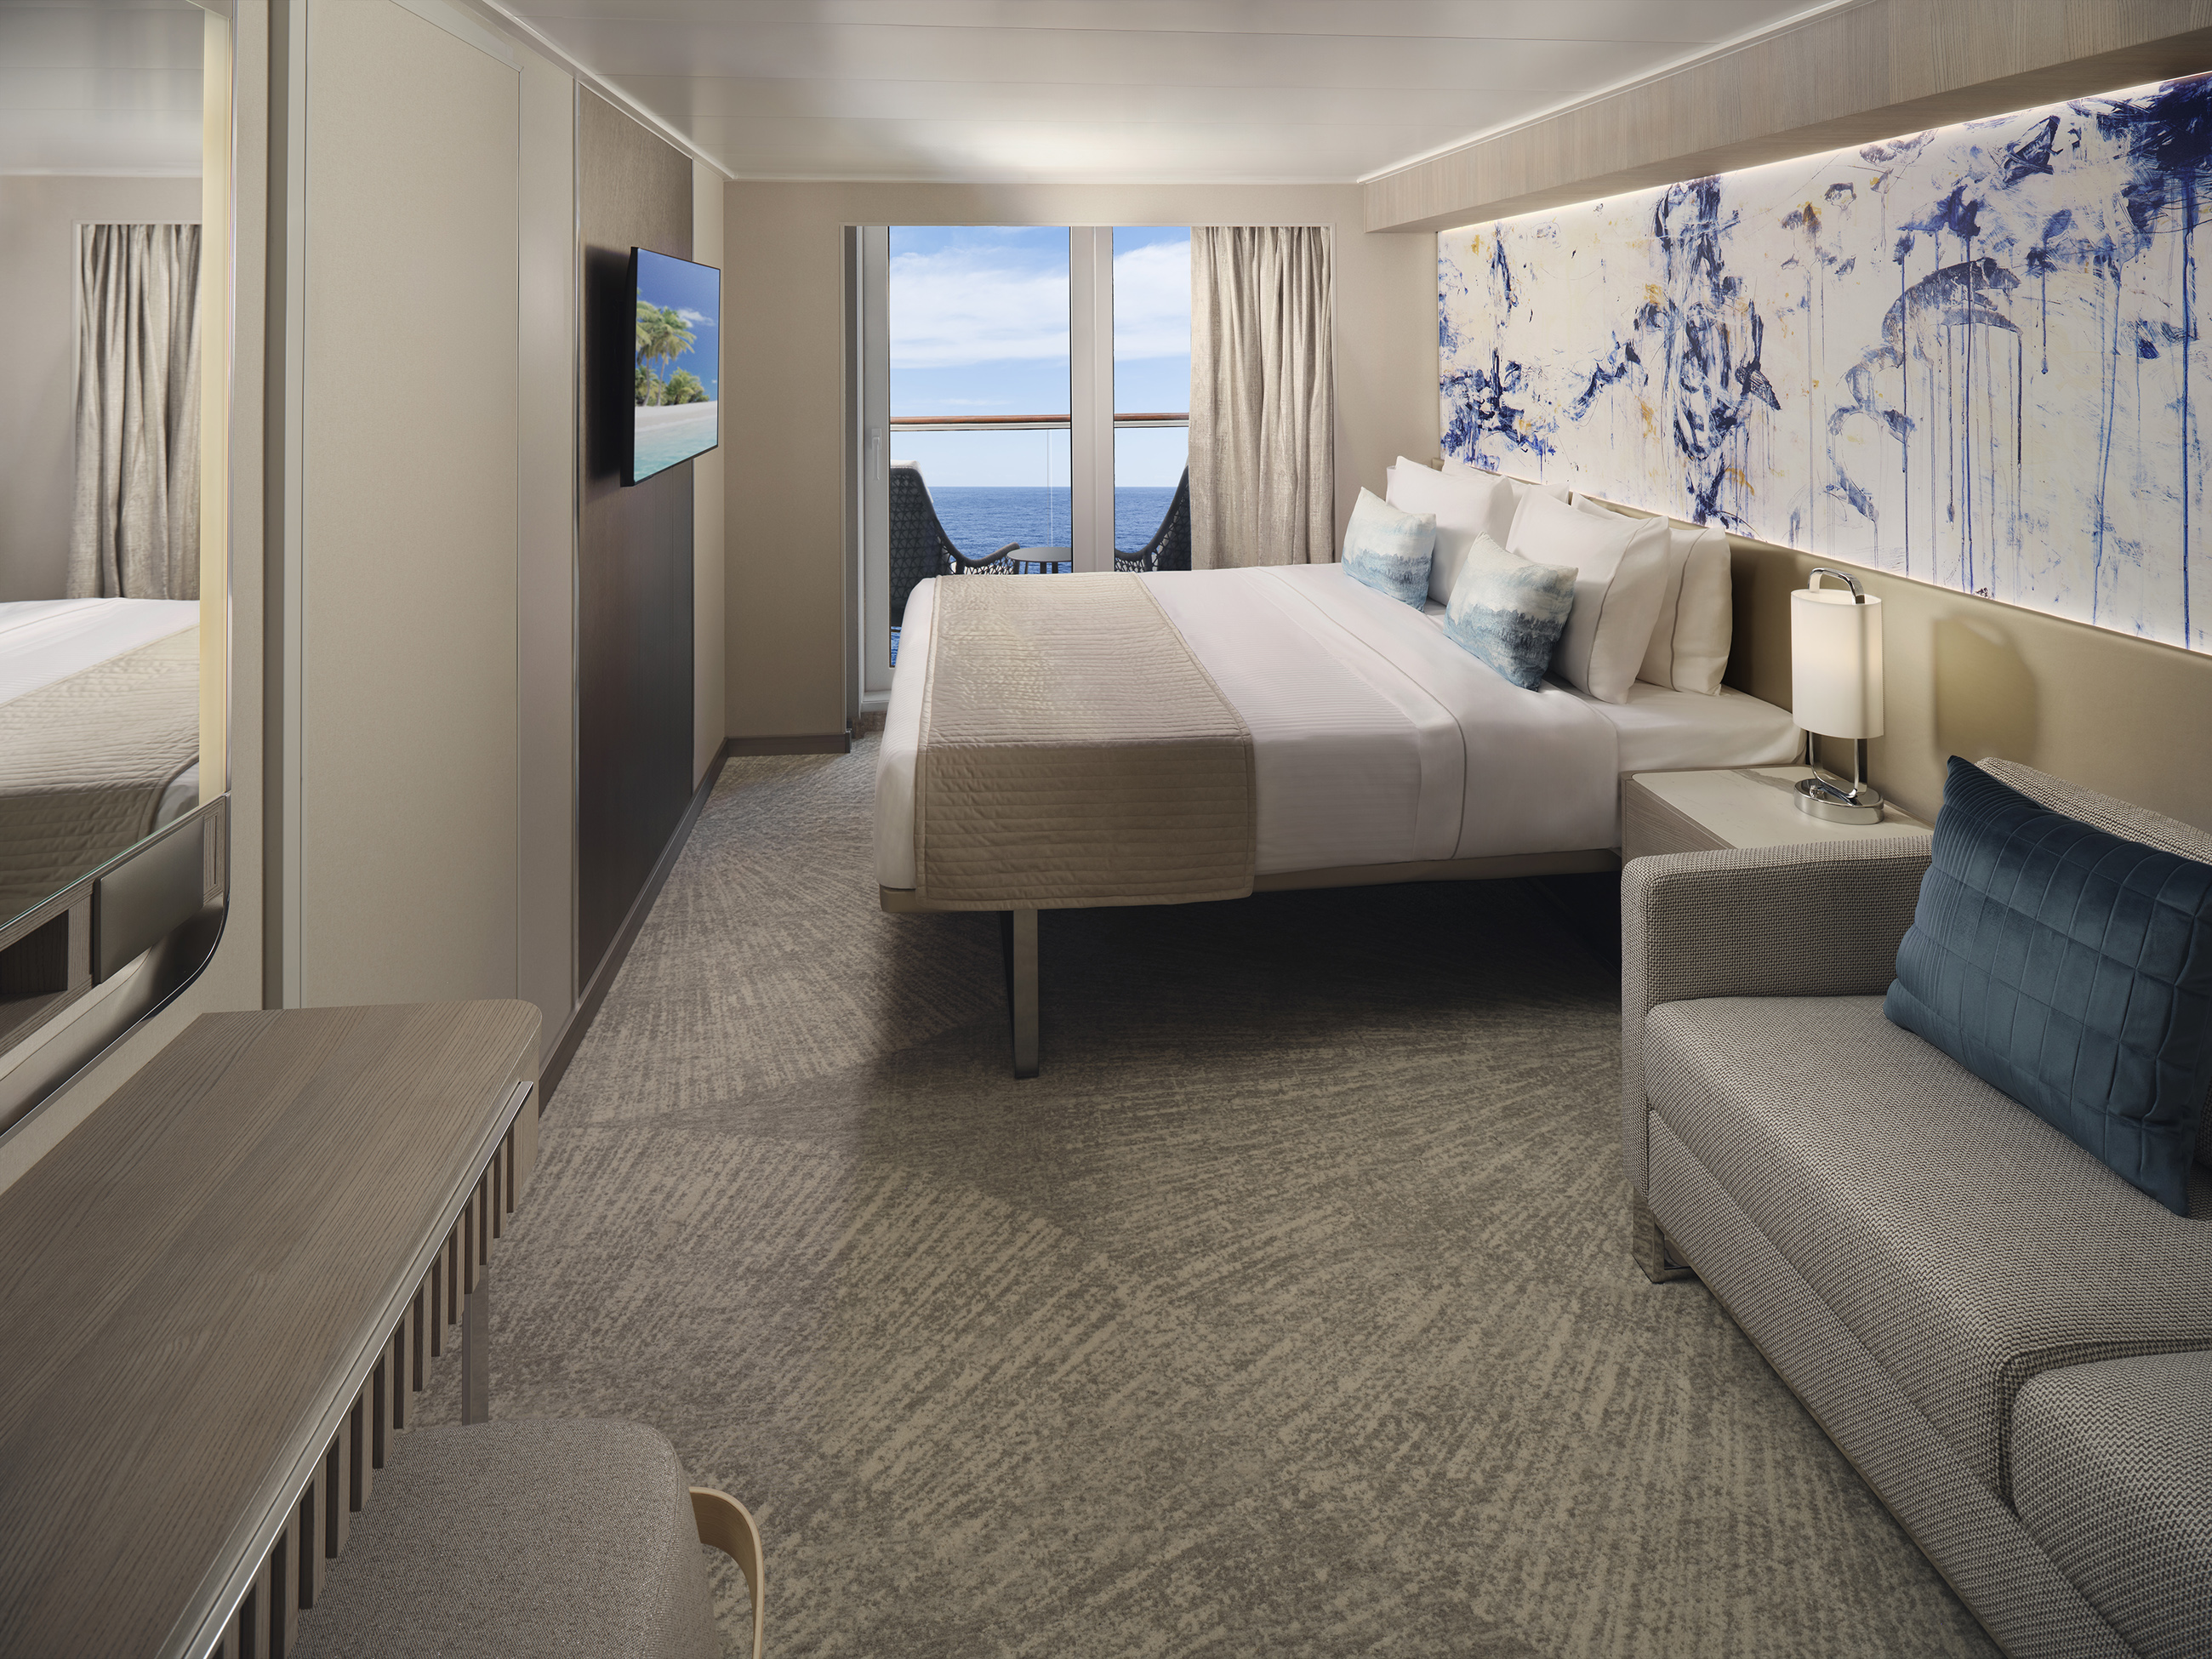 Norwegian Viva’s balcony staterooms offer a relaxed atmosphere with spacious designs, innovative storage options and new murals by American artist Patti Parsons exclusively designed for NCL’s newest ship.